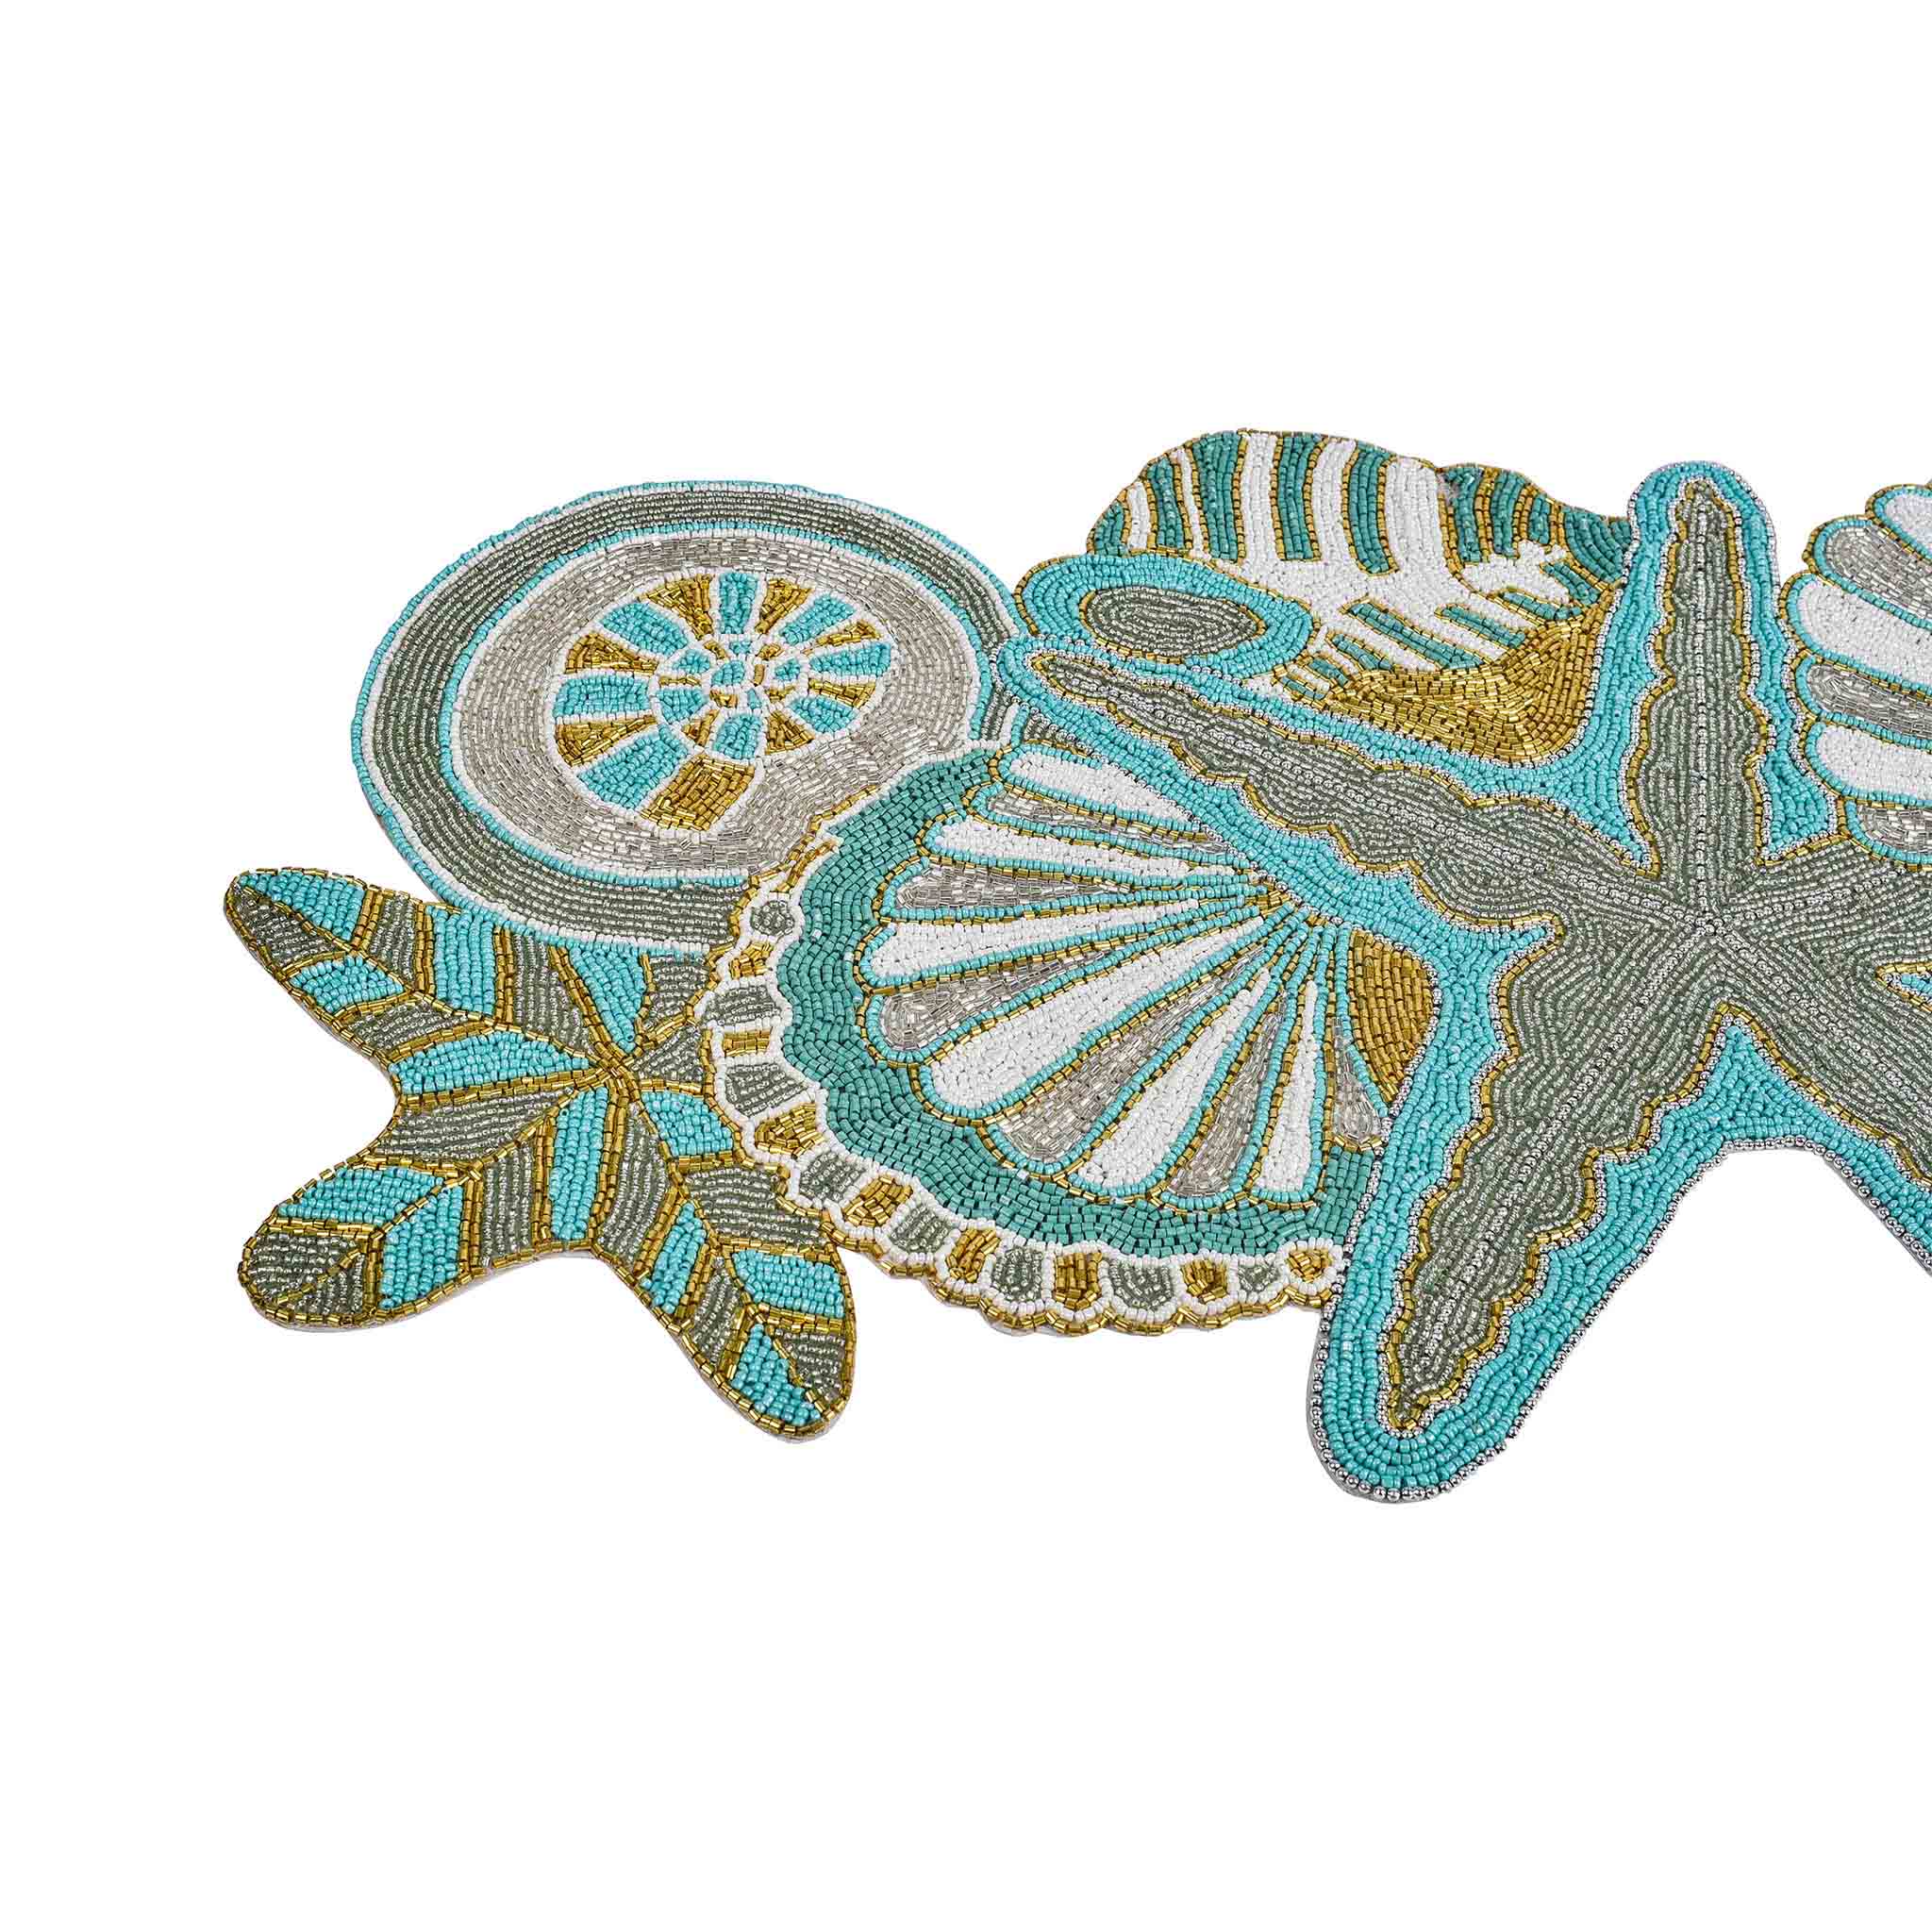 Ringo Star Fish Embroidered Table Runner<br>Size: 36"x15.75"<br>Color: Multi Color: